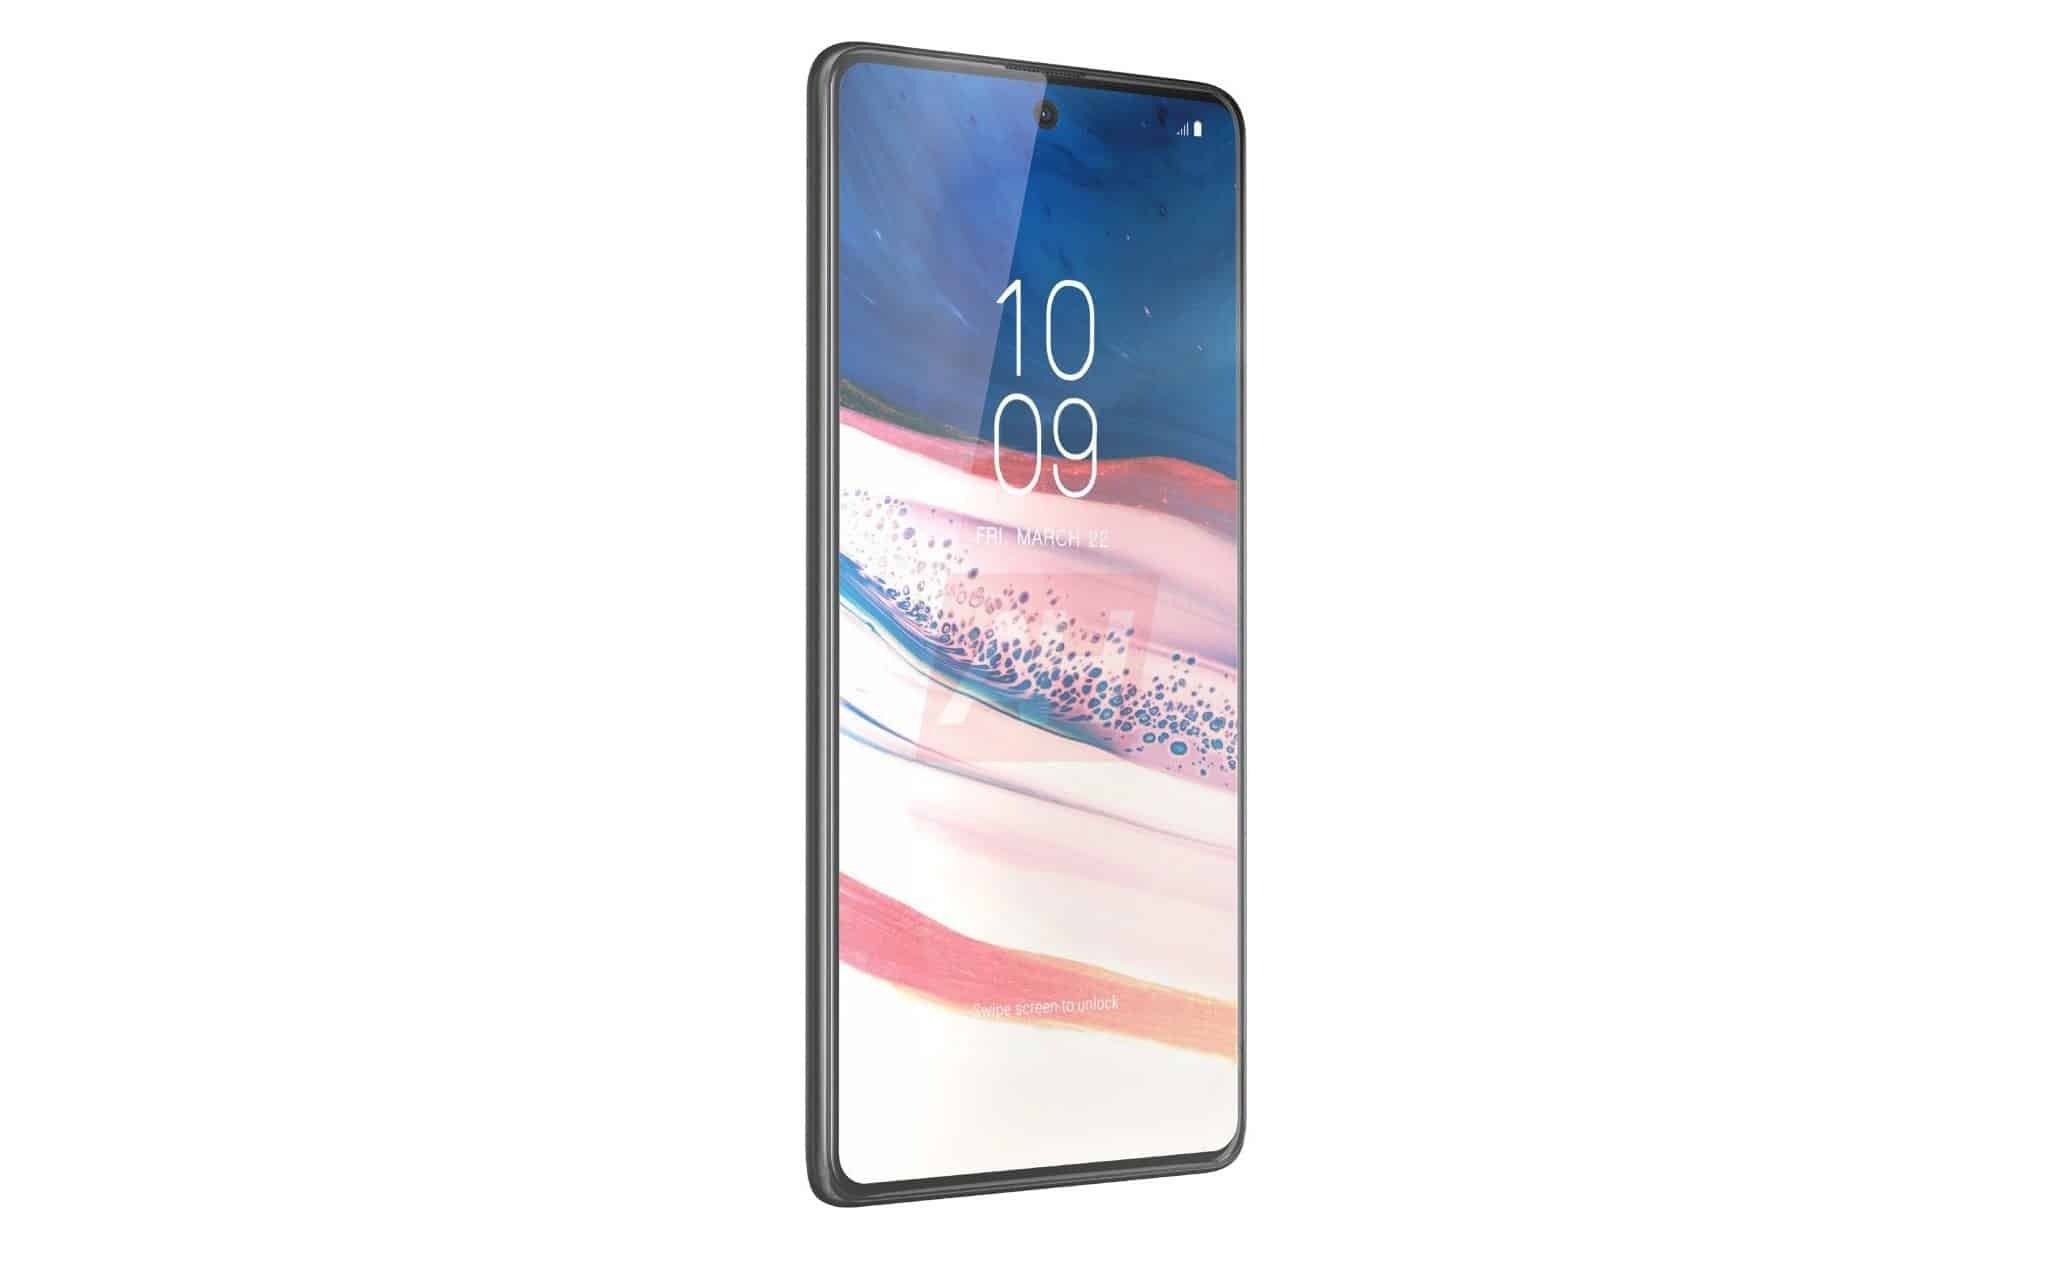 Samsung Galaxy Note 10 Lite - These renders allegedly show Samsung&#039;s Galaxy S10 Lite and Note 10 Lite